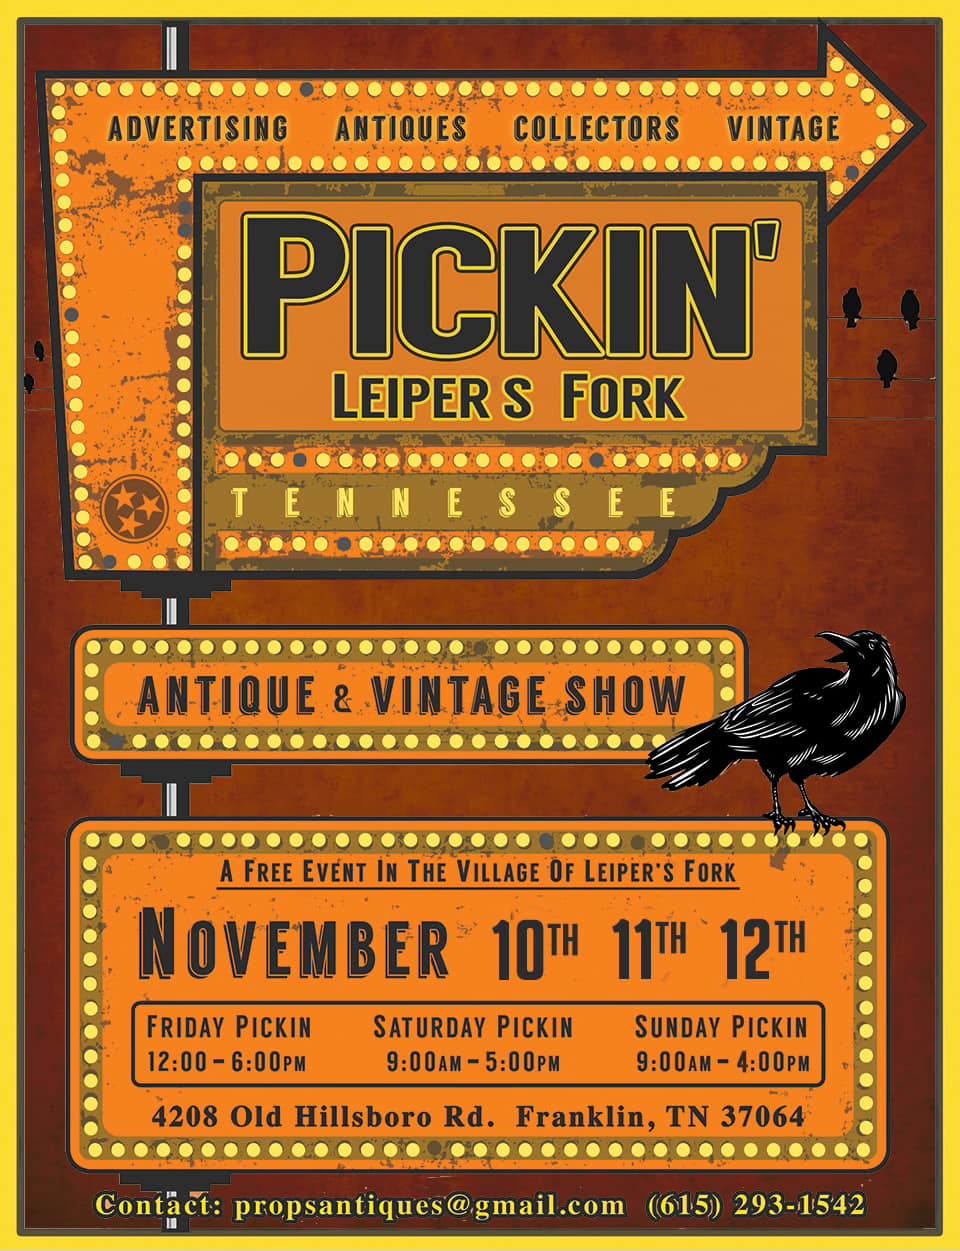 Pickin’ Leiper’s Fork Shopping Antique & Vintage Event in Franklin, Tennessee.